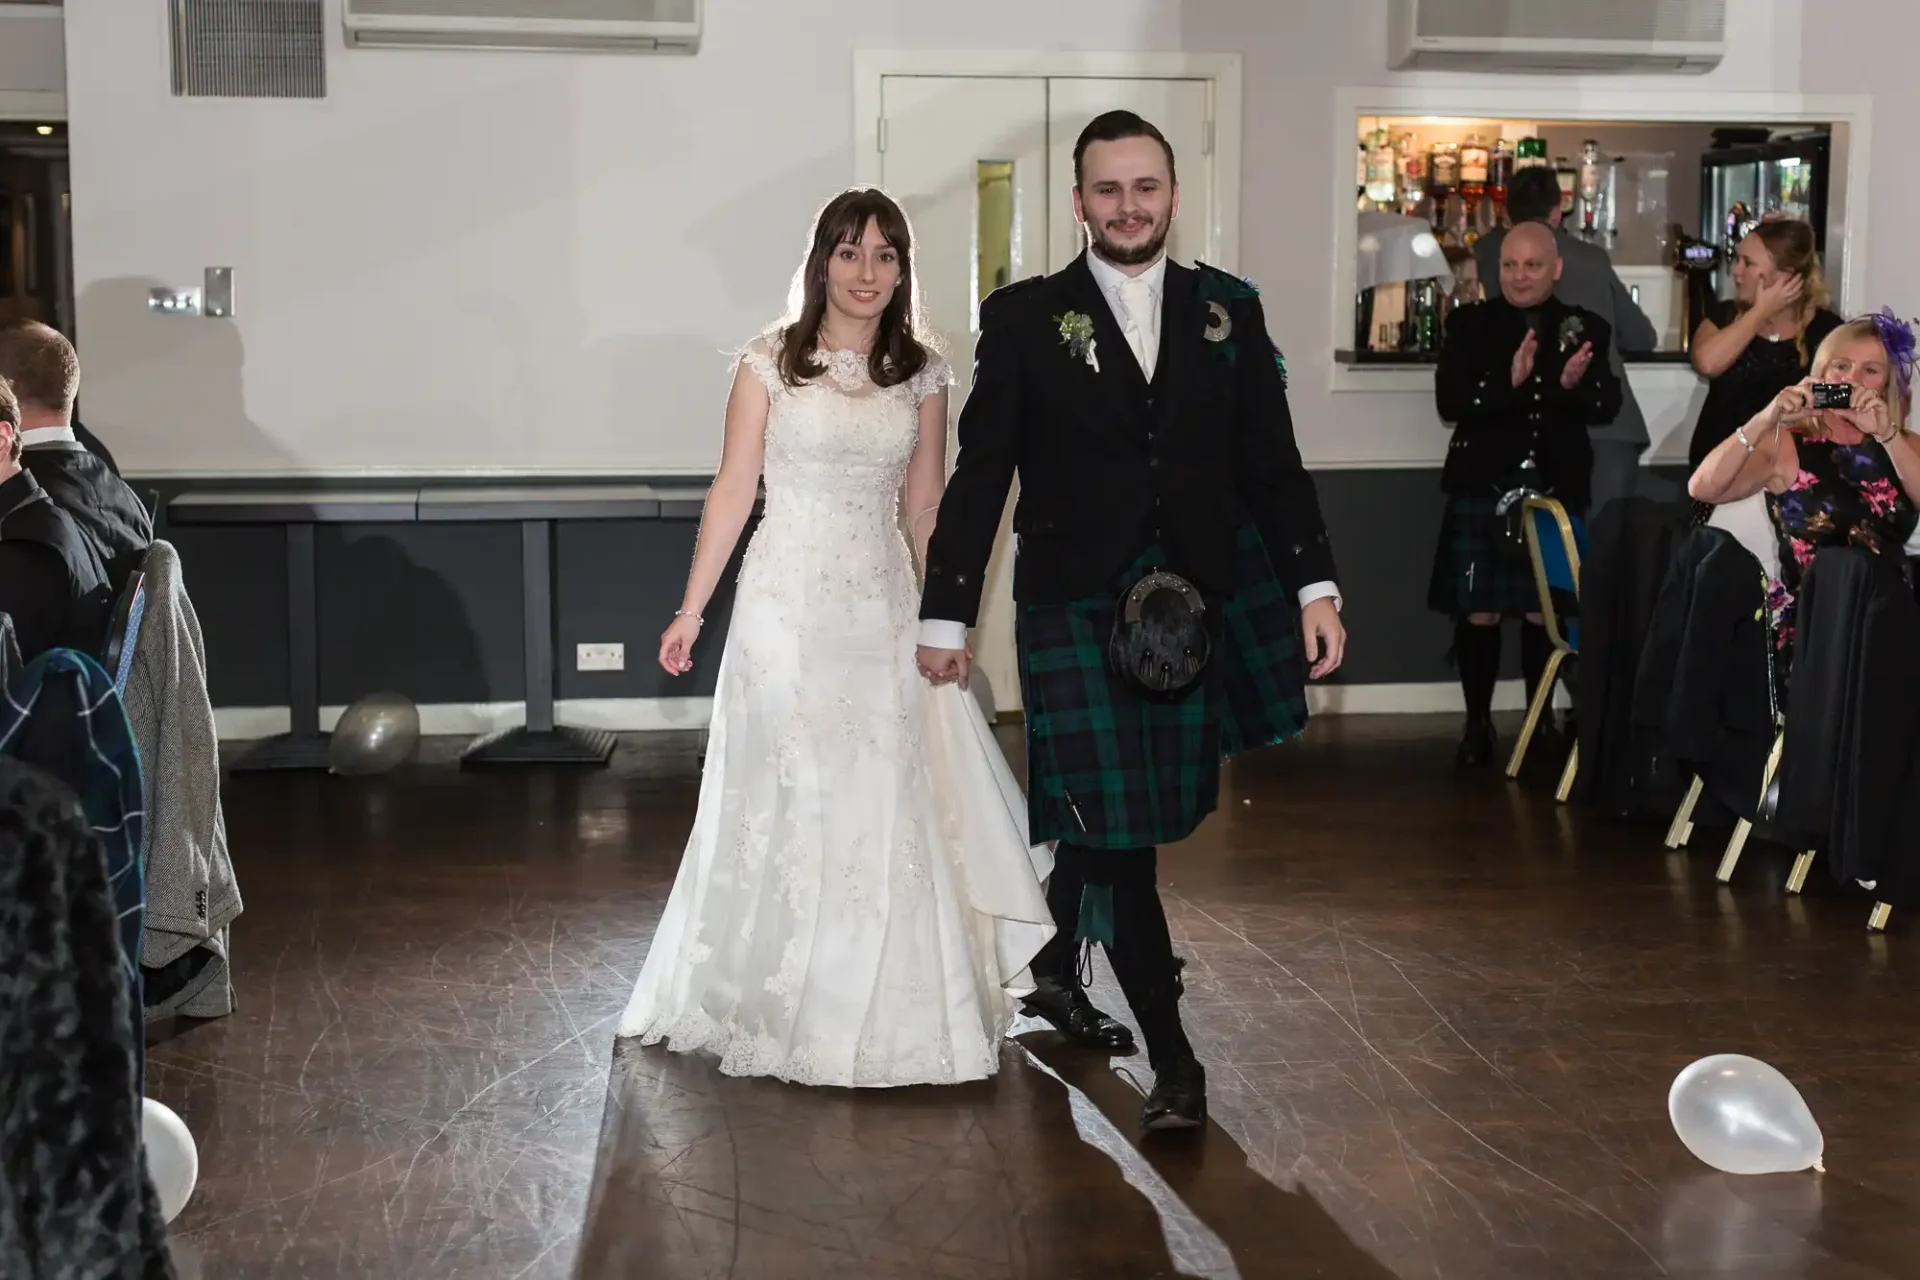 A bride in a white gown and a groom in a kilt walk hand-in-hand at a wedding reception, with guests looking on.